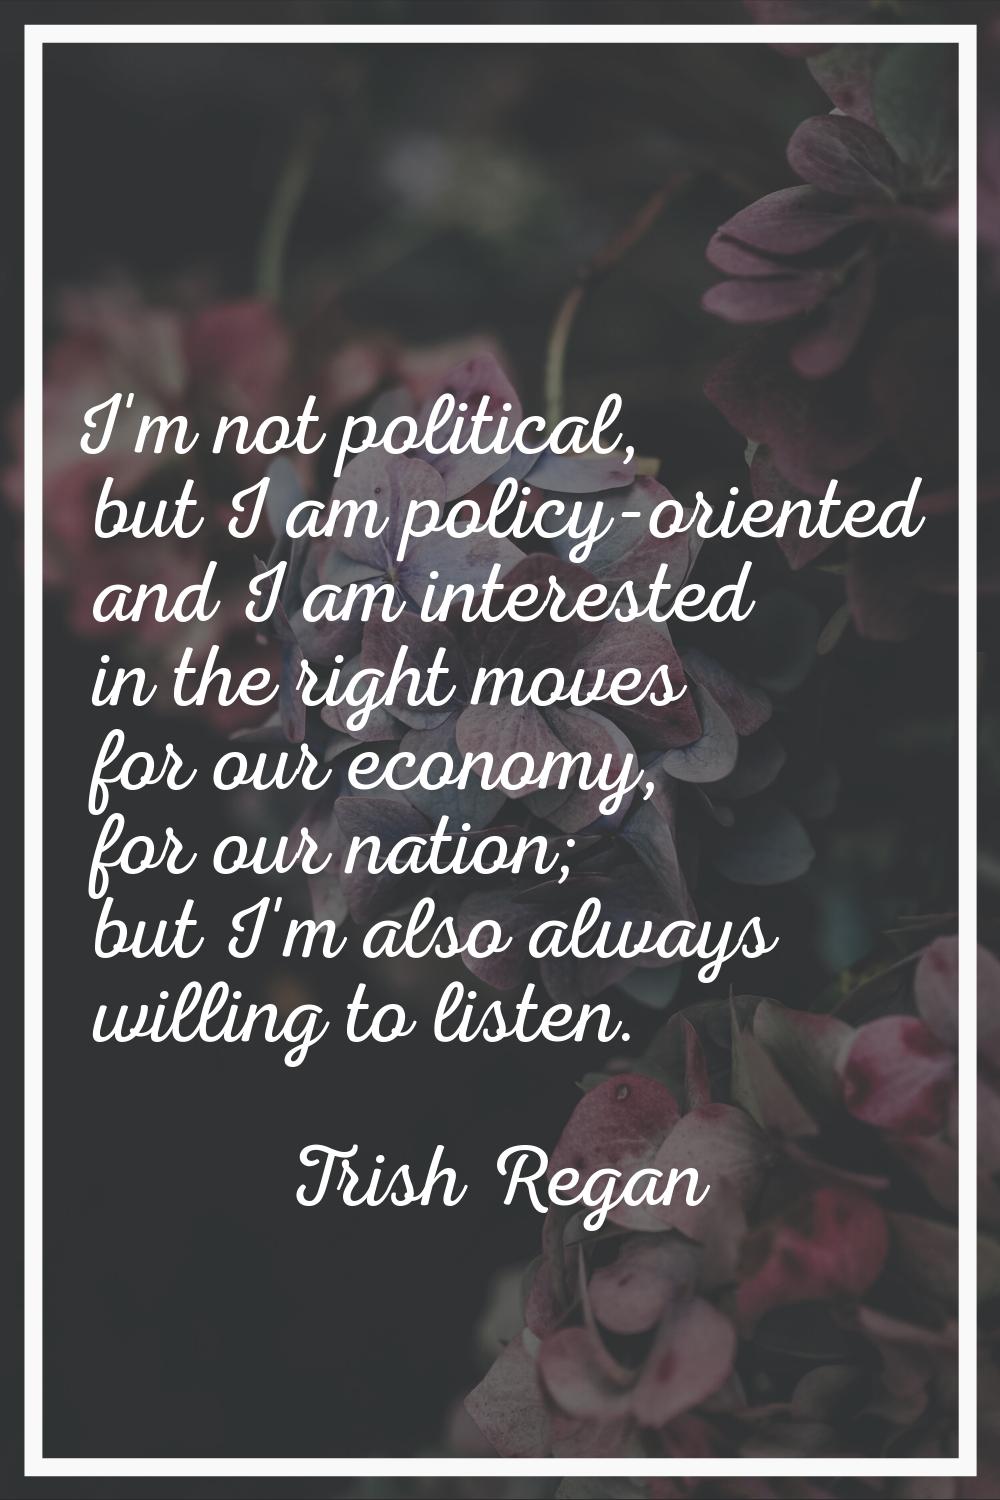 I'm not political, but I am policy-oriented and I am interested in the right moves for our economy,